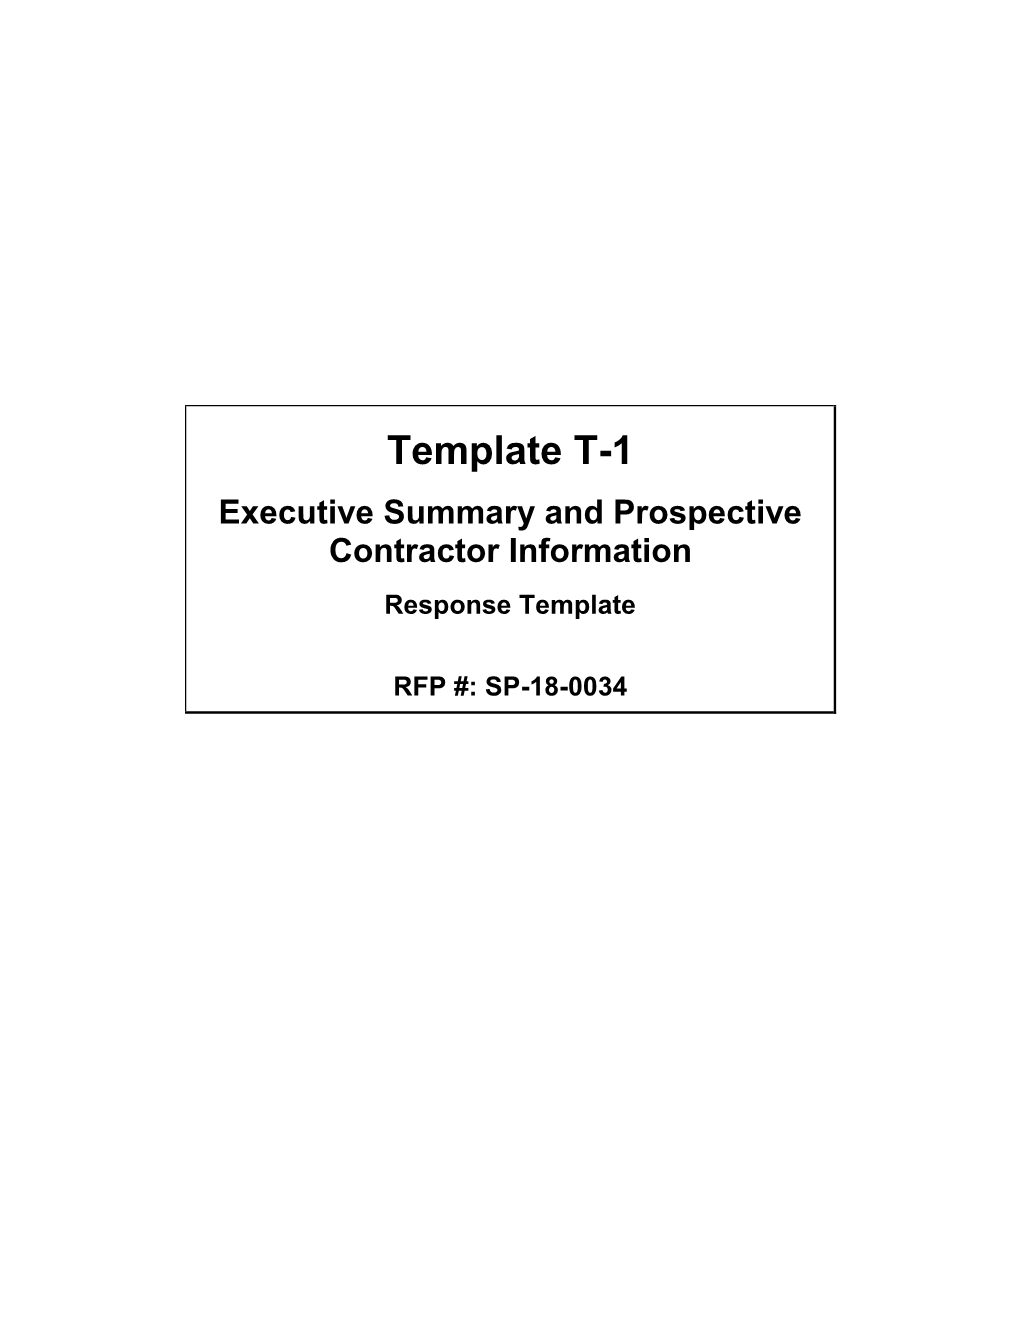 Template T-1 Executive Summary and Prospective Contractor Information Response Template